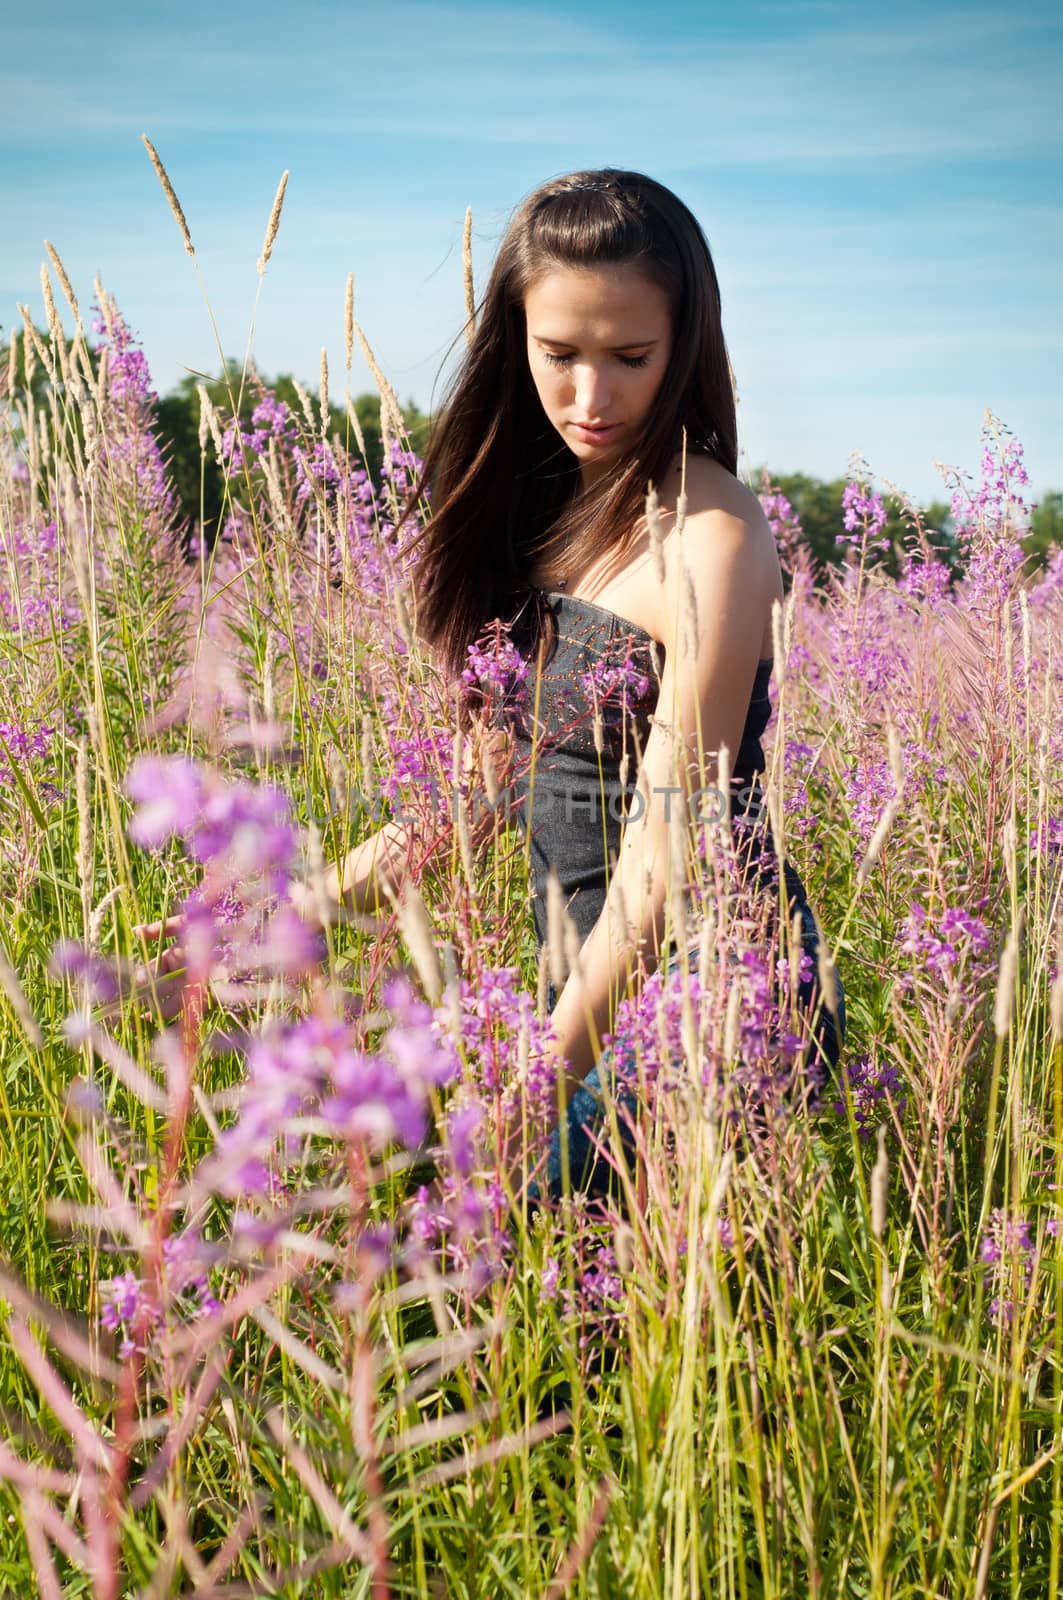 Outdoor shot of beautiful brunette woman with long hair